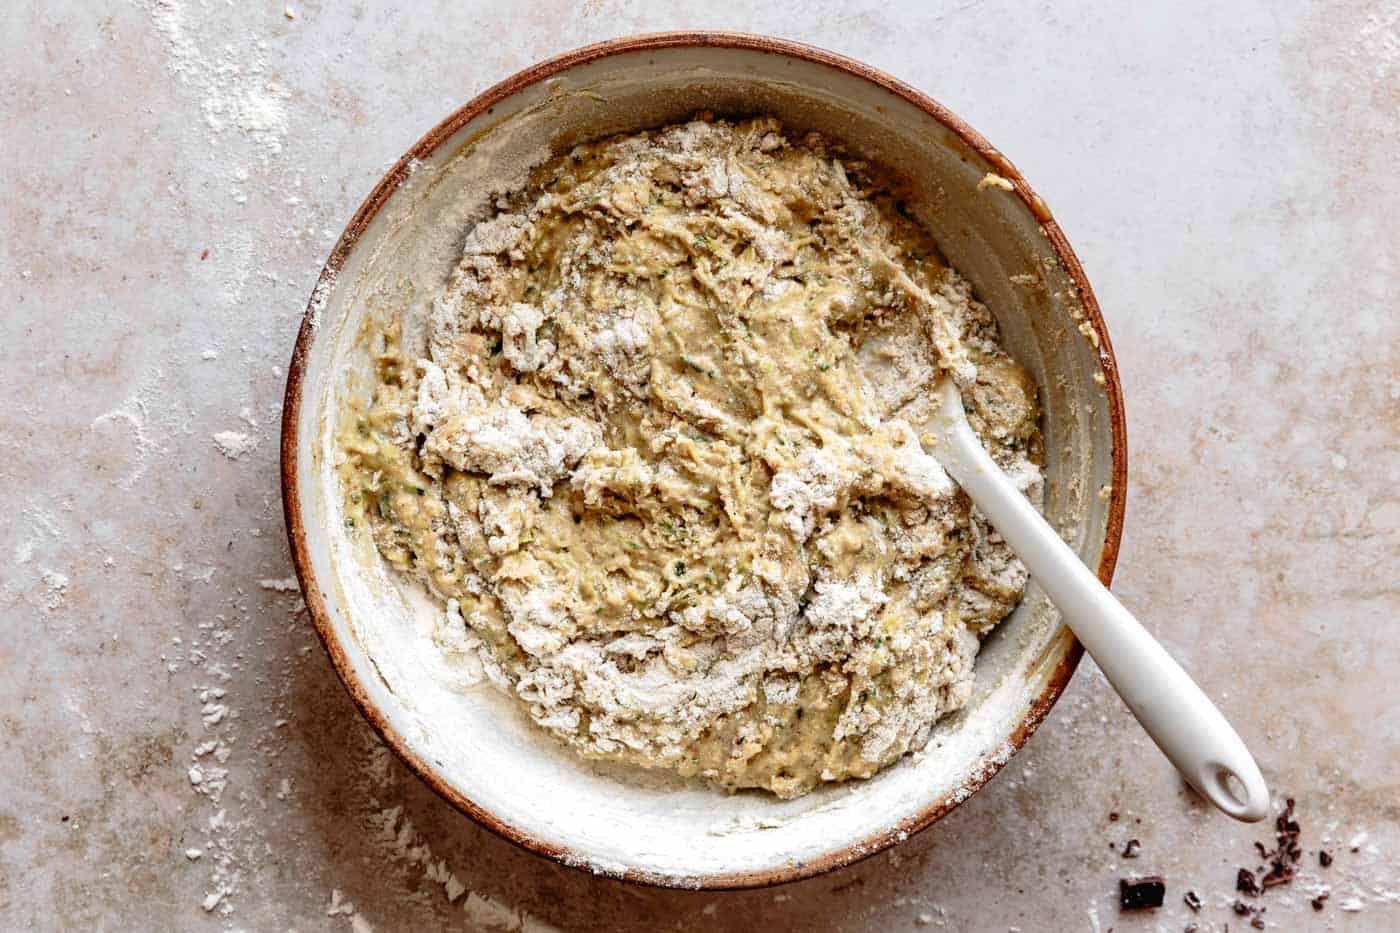 dry ingredients stirred into easy paleo zucchini bread batter